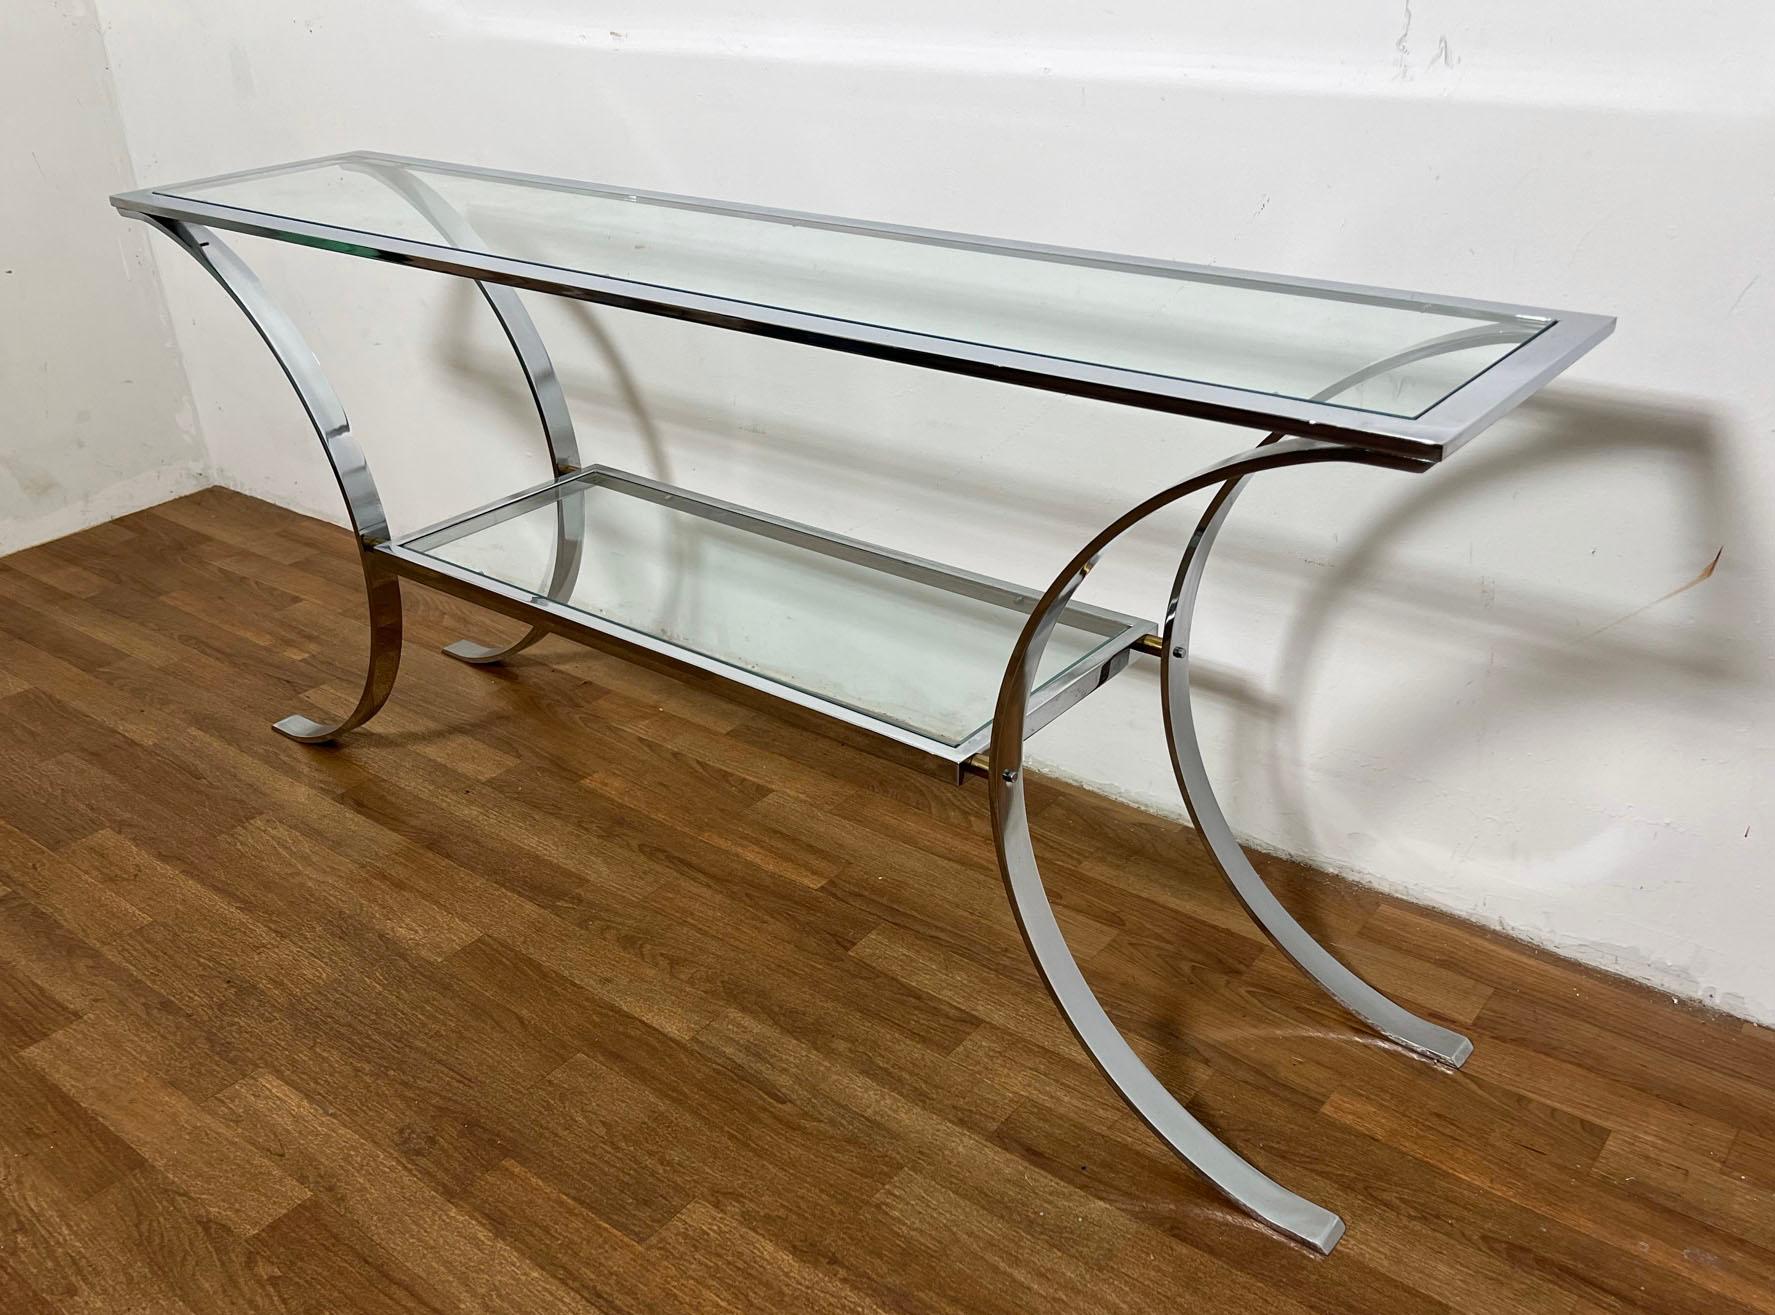 A chrome and glass arched console table, ca. 1970s, in the style of Milo Baughman. Most likely of High Point, NC origin.